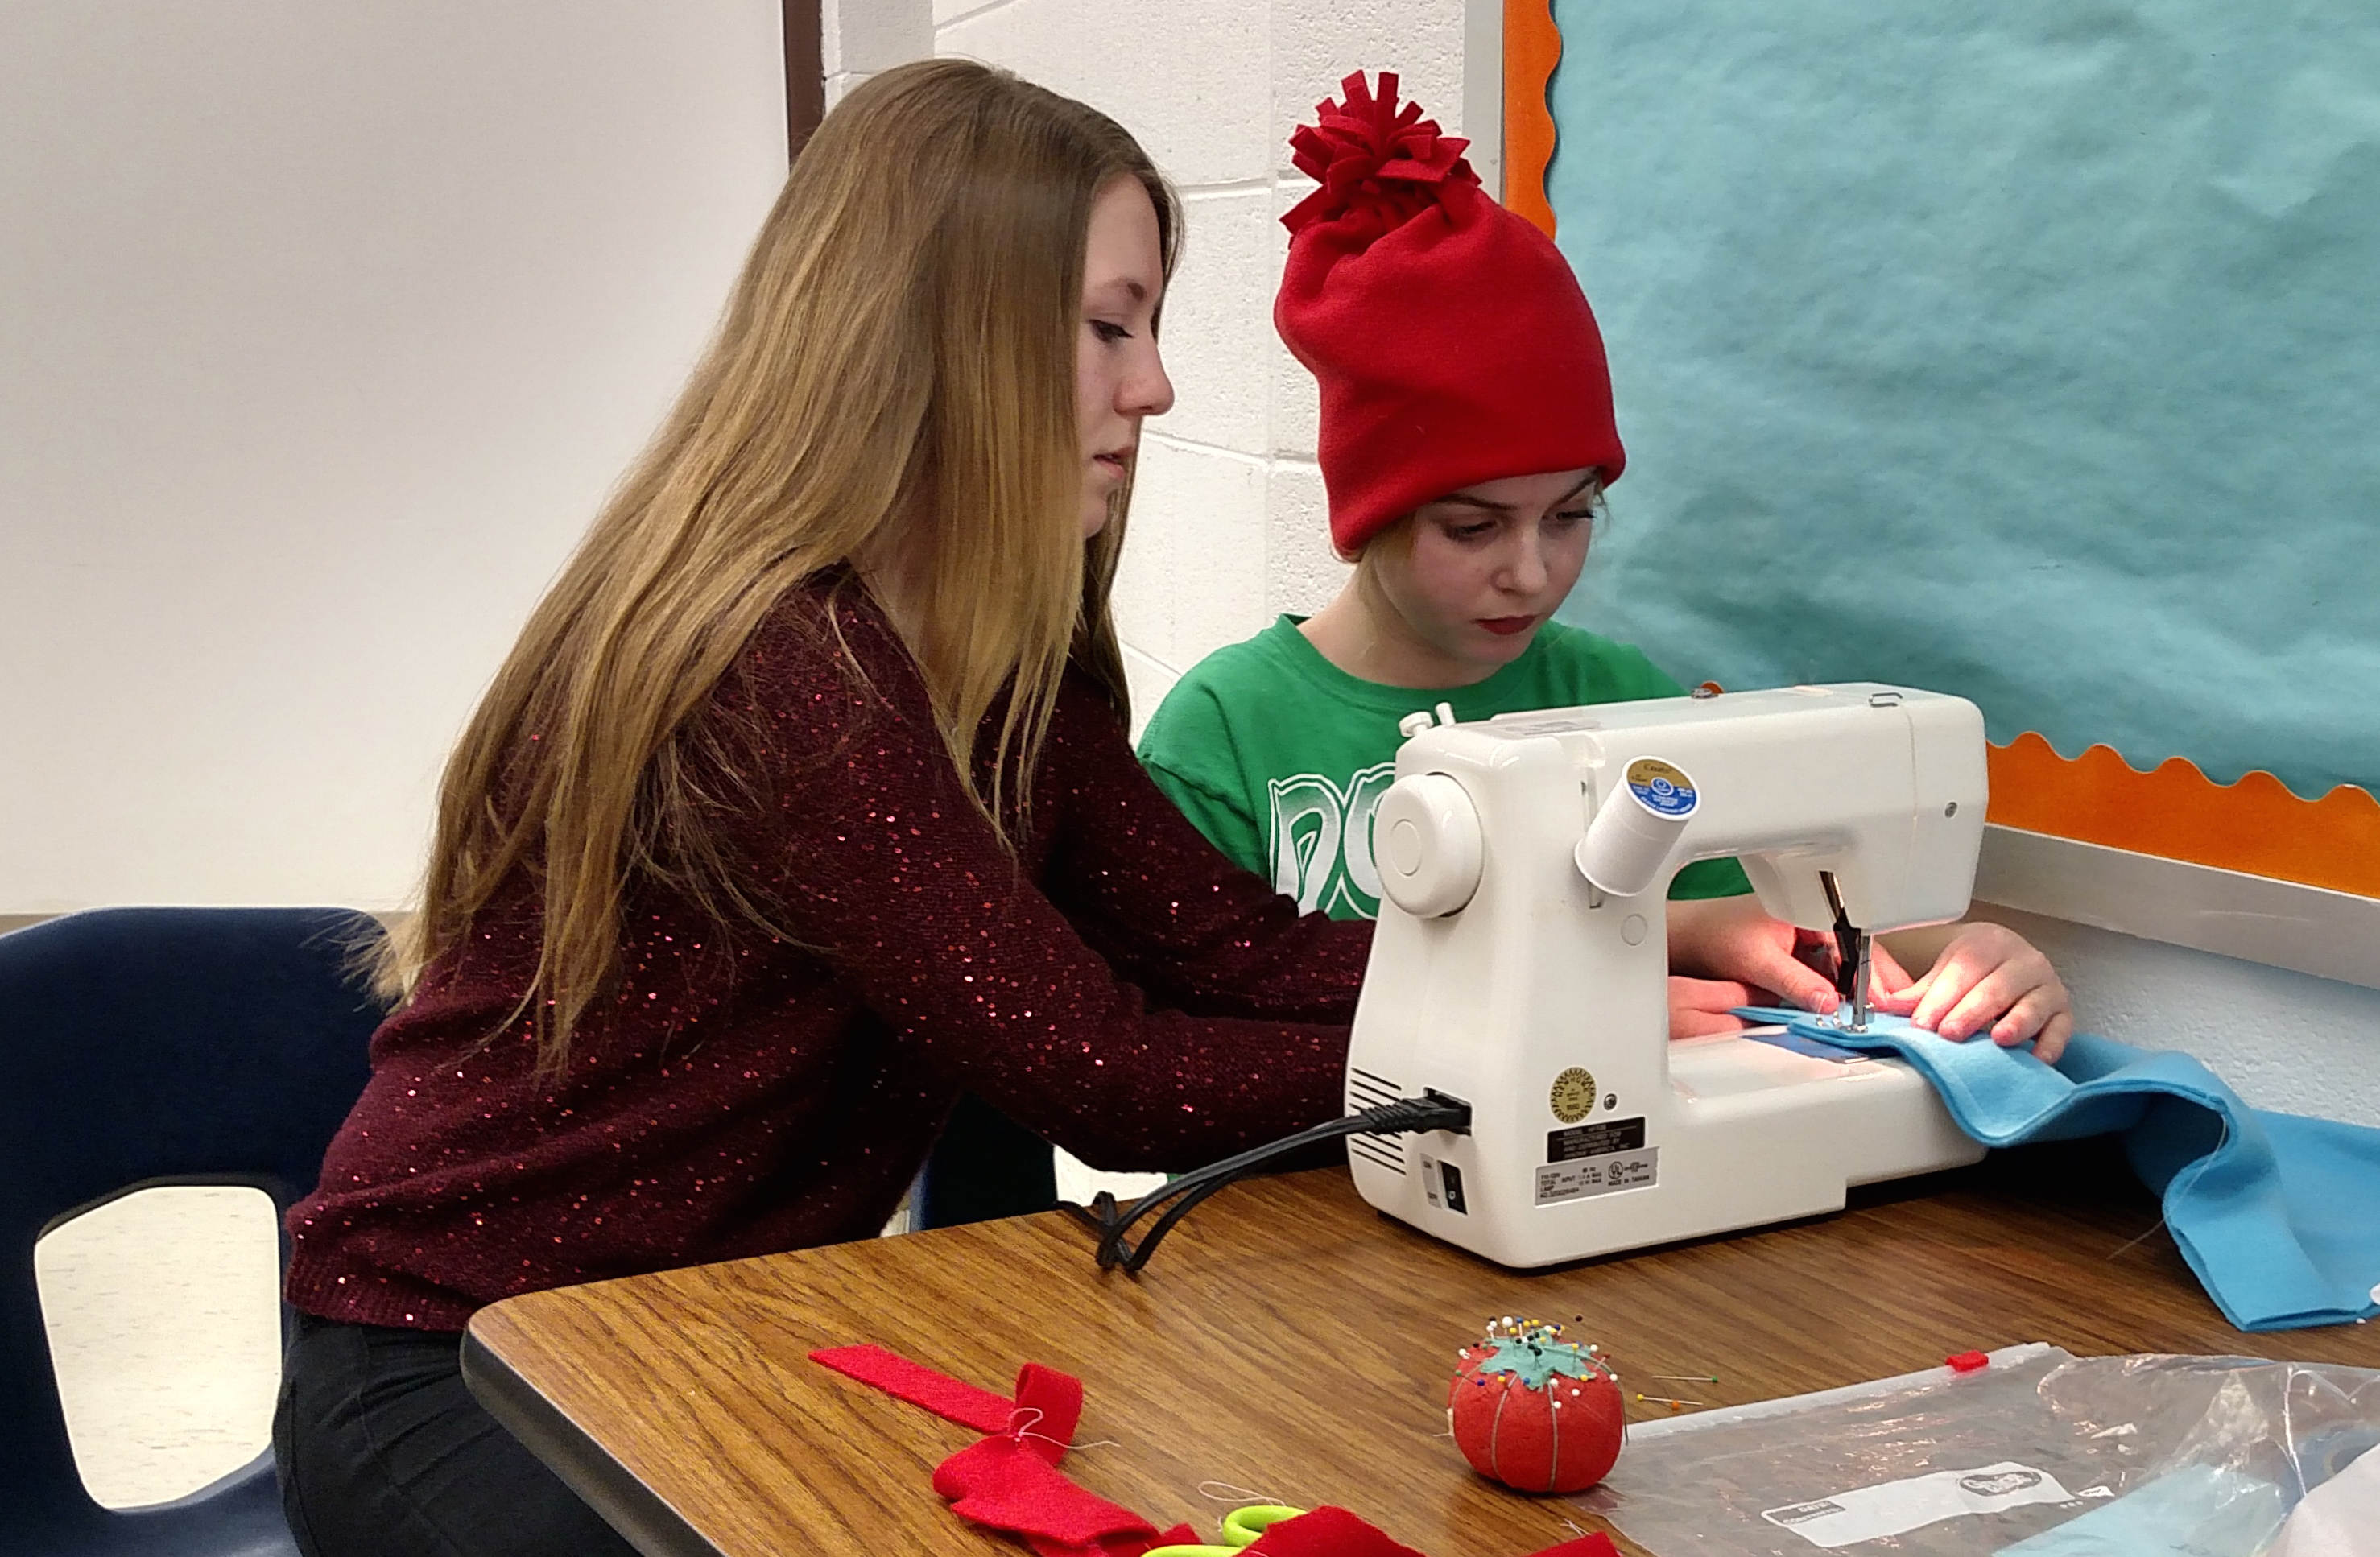 Learn to Sew!  Woodford County Extension Office